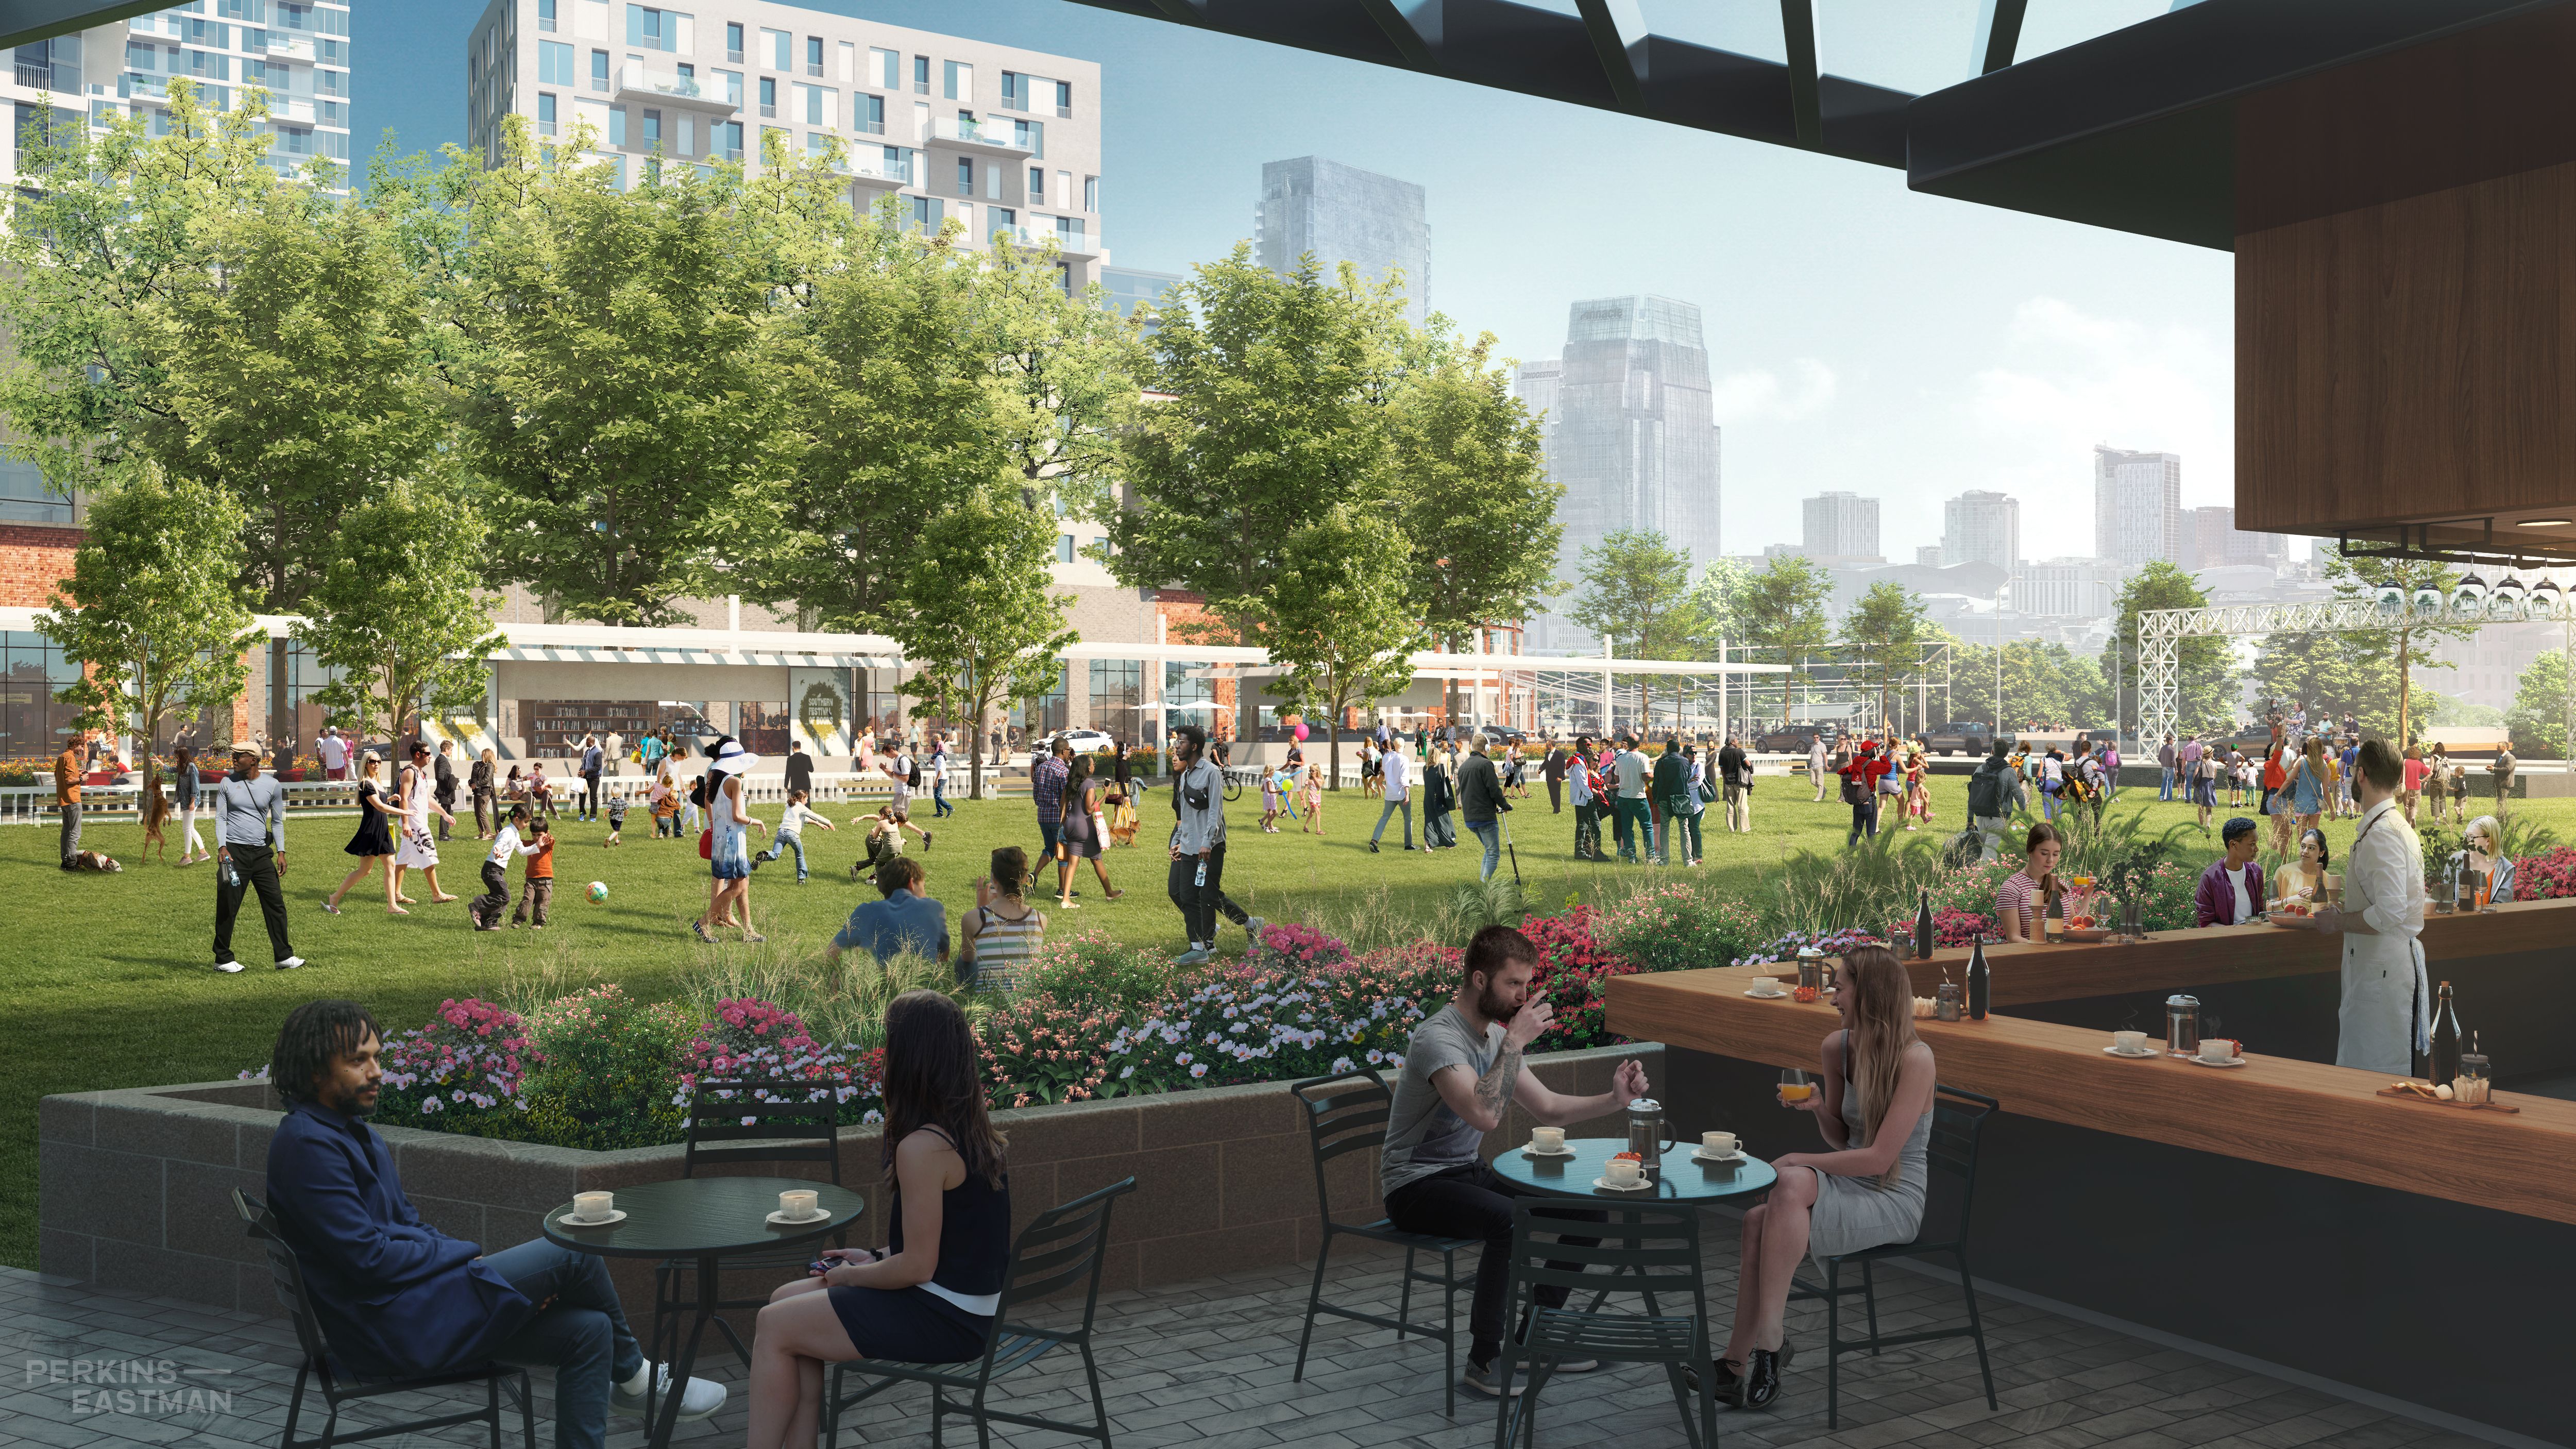 A rendering of public space included in the East Bank vision.